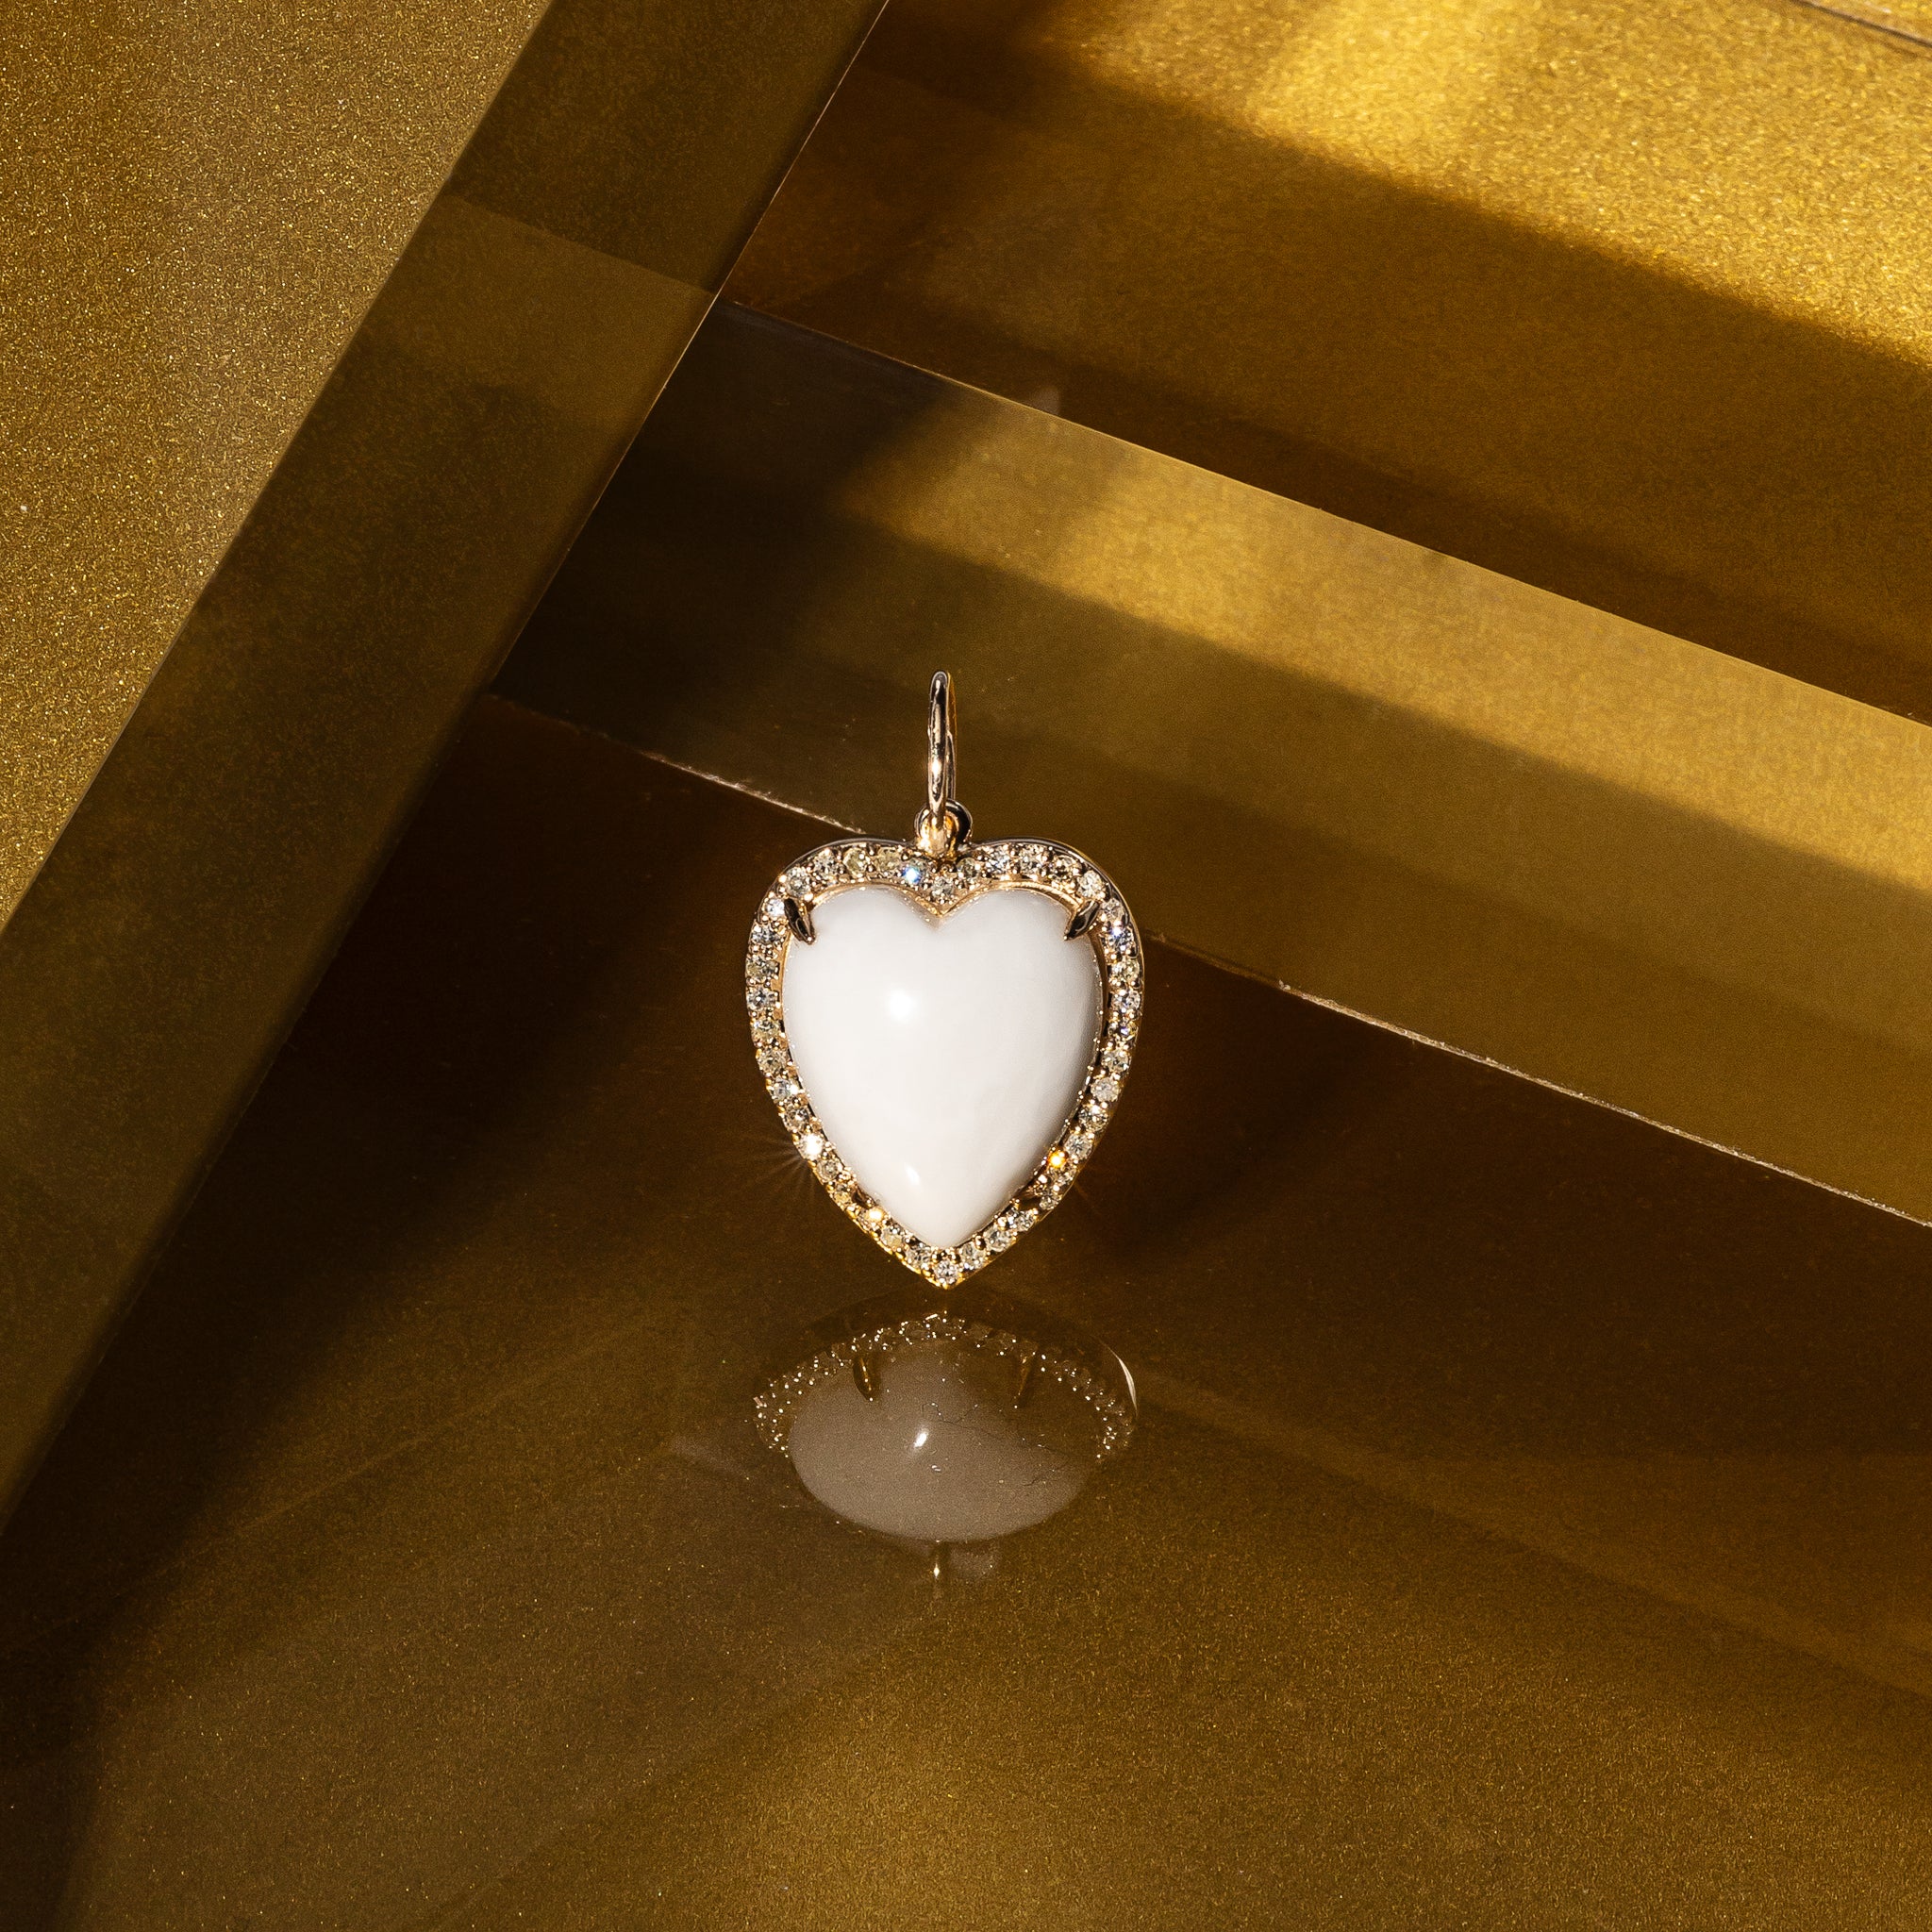 Yellow Gold Diamond and White Agate Chubby Heart Charm